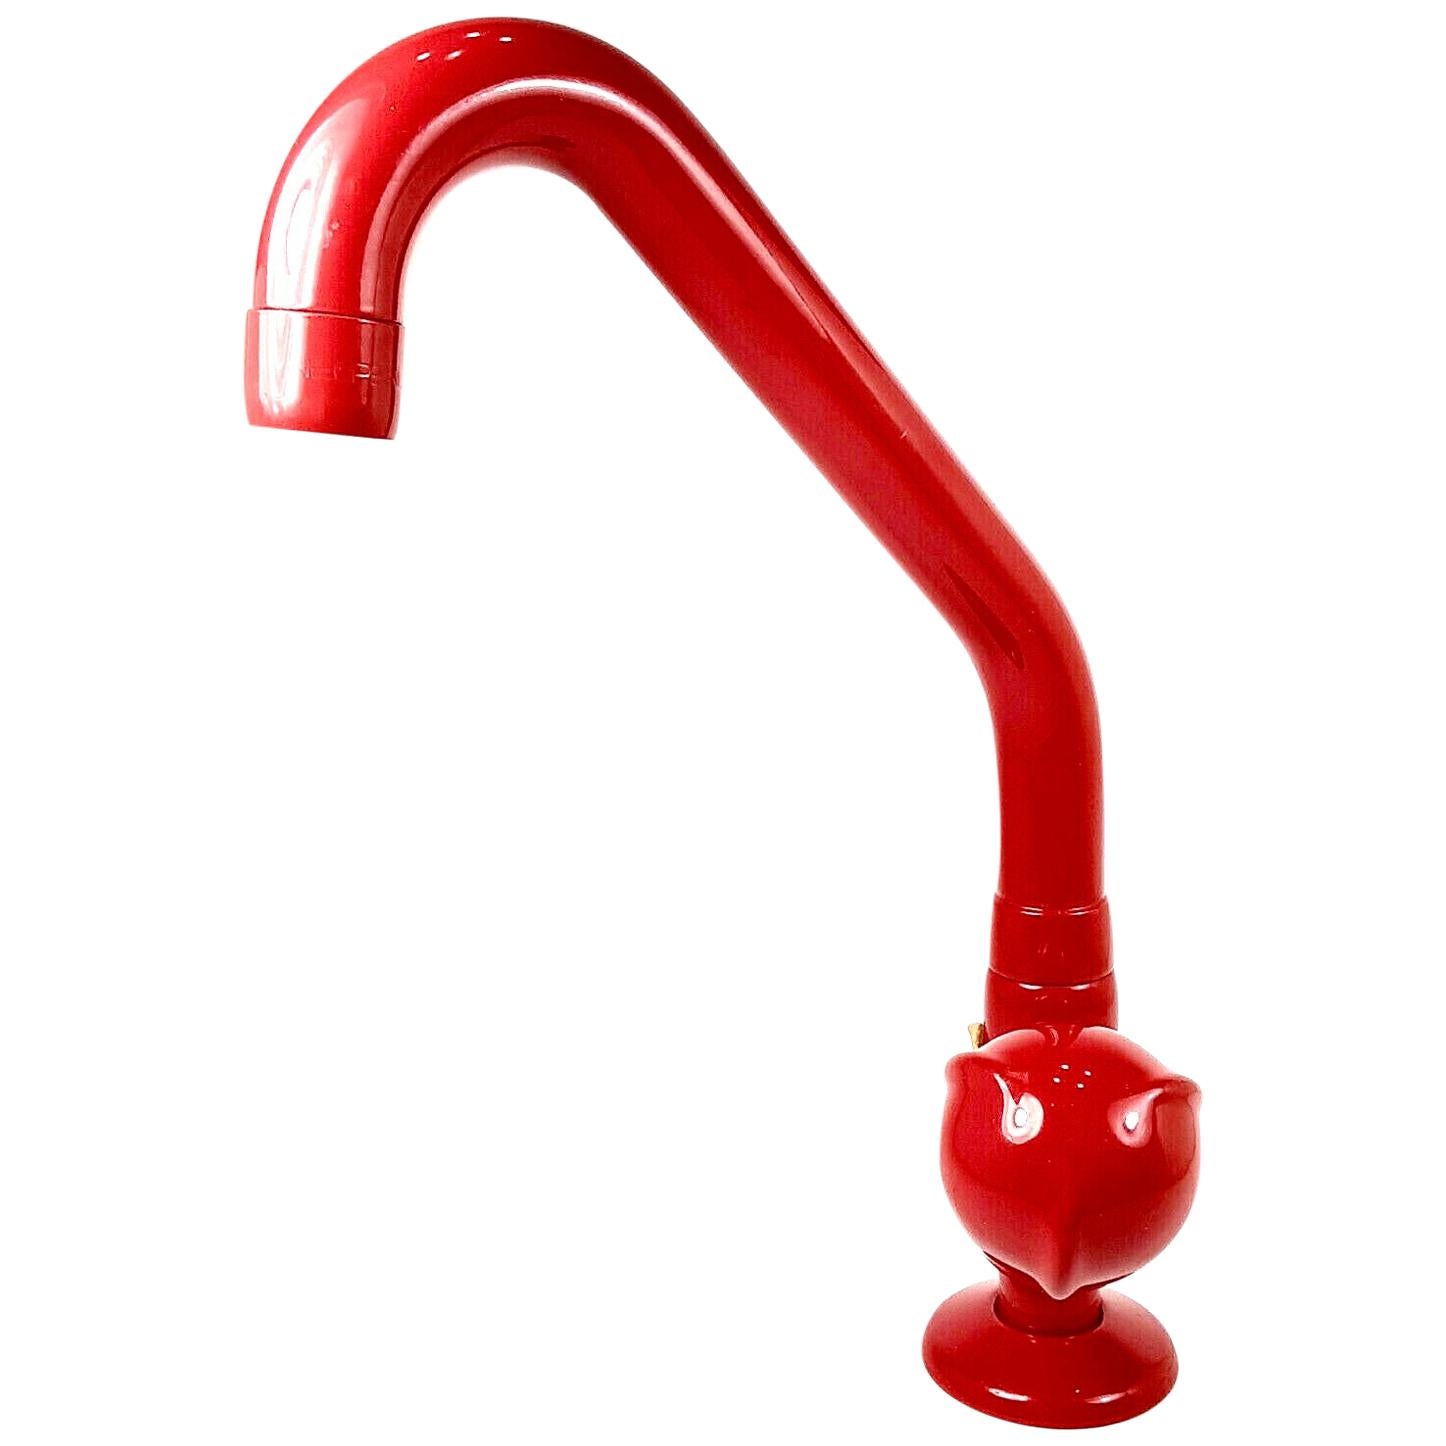 Custom Vintage Lipstick Red Curved Tap Faucet by KWC Switzerland, Single-Handle